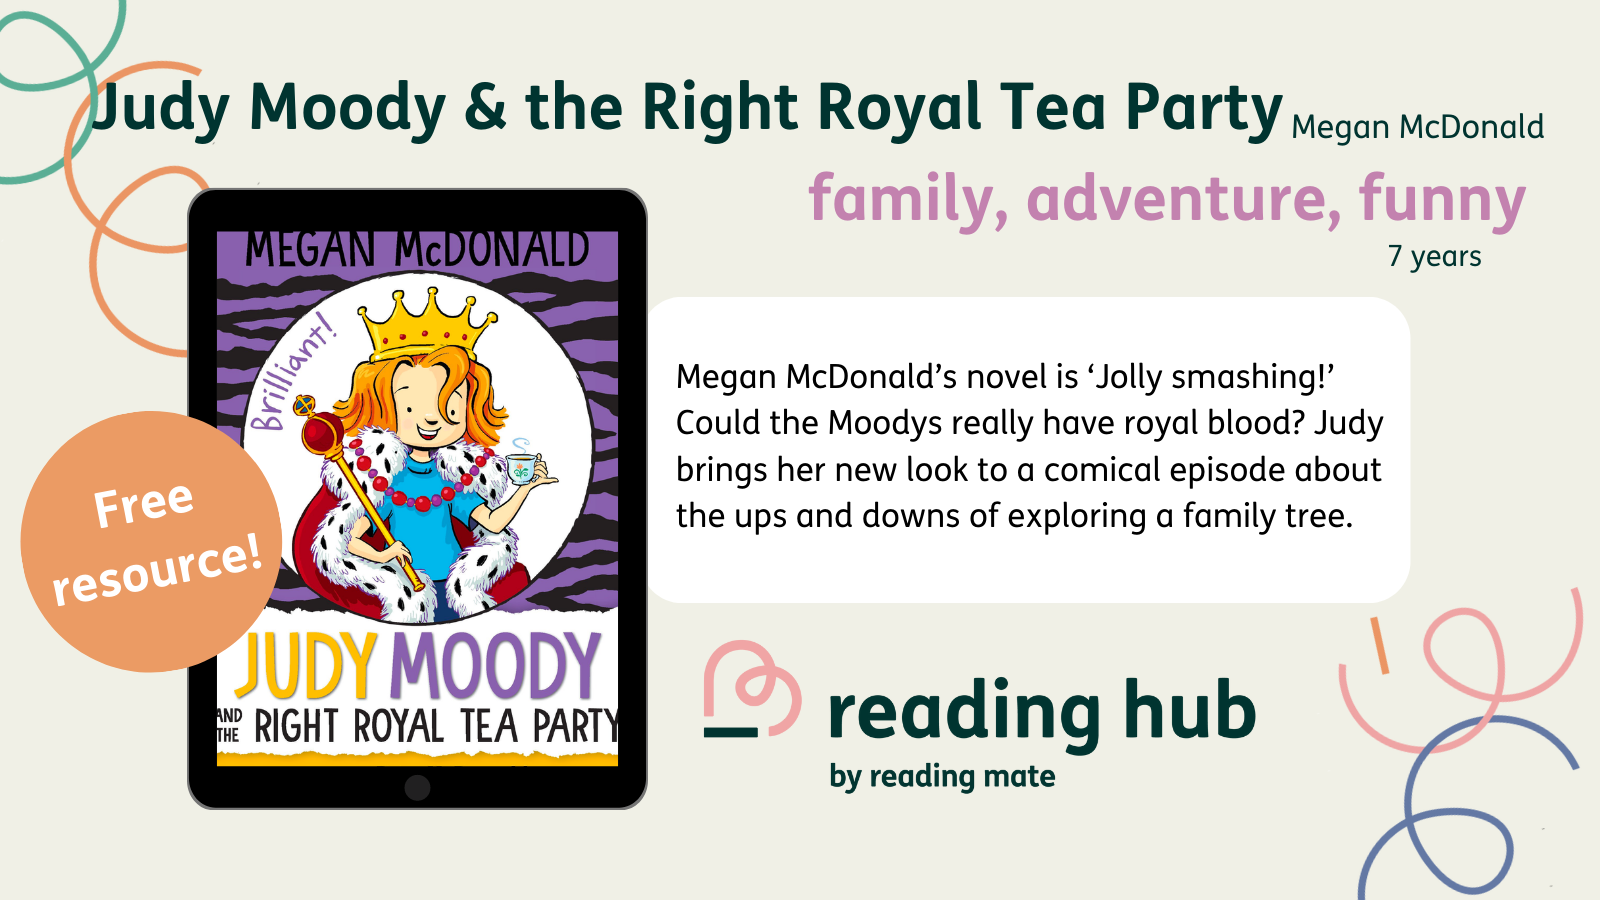 Megan McDonald’s novel is ‘Jolly smashing!’ Could the Moodys really have royal blood? Judy brings her new look to a comical episode about the ups and downs of exploring a family tree.